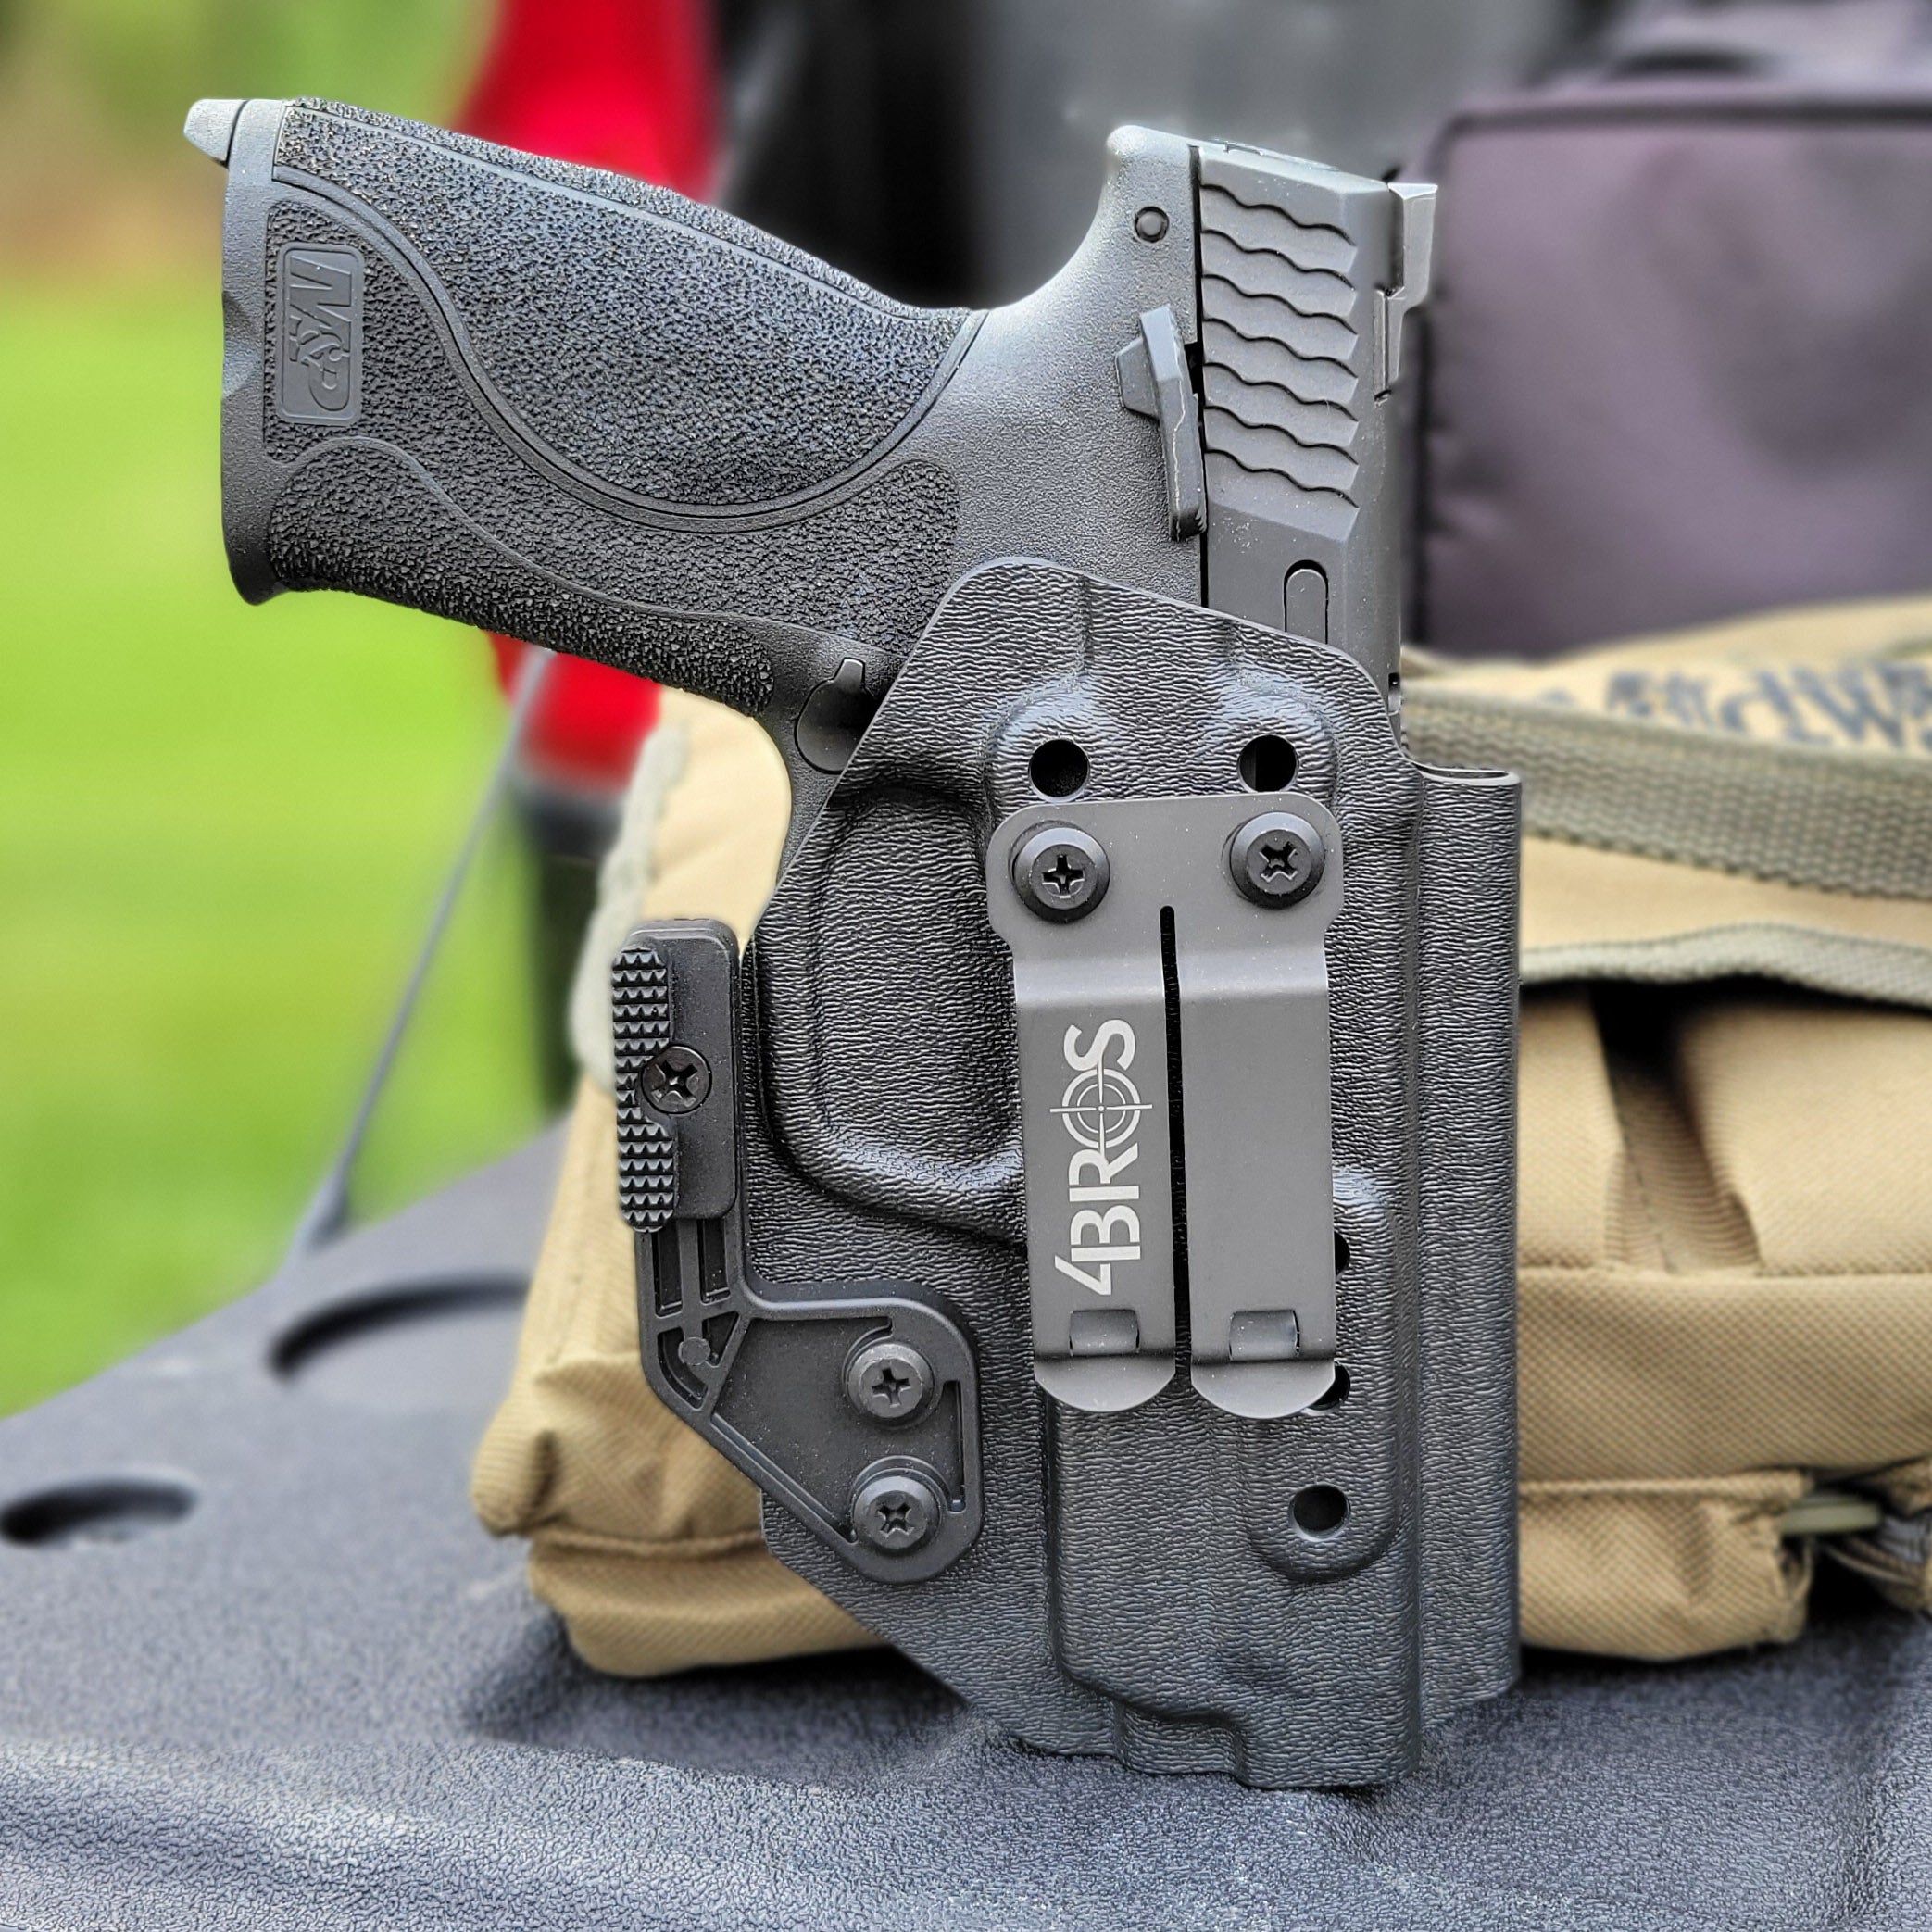 Inside Waistband Kydex Taco Style Holster designed to fit the Smith and Wesson M&P 1.0 & 2.0 4" pistol with thumb safety. The holster is designed to fit the 4" barrel lengths.  Full sweat guard, adjustable retention, profiled for a red dot sight. Proudly made in the USA for veterans and law enforcement. 